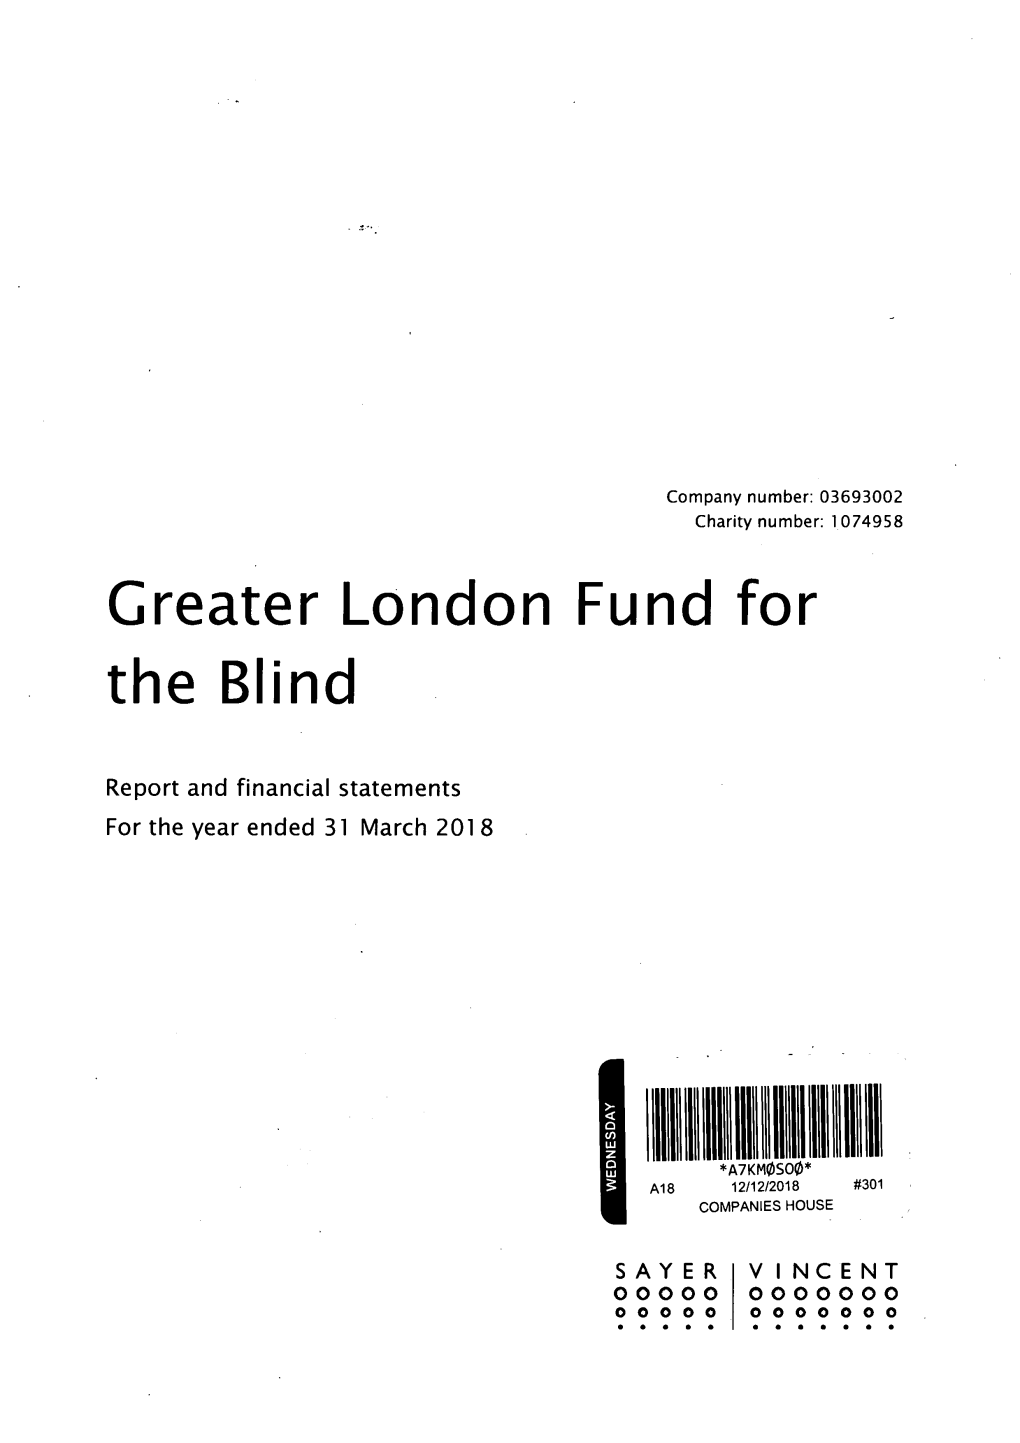 Greater London Fund for the Blind Annual